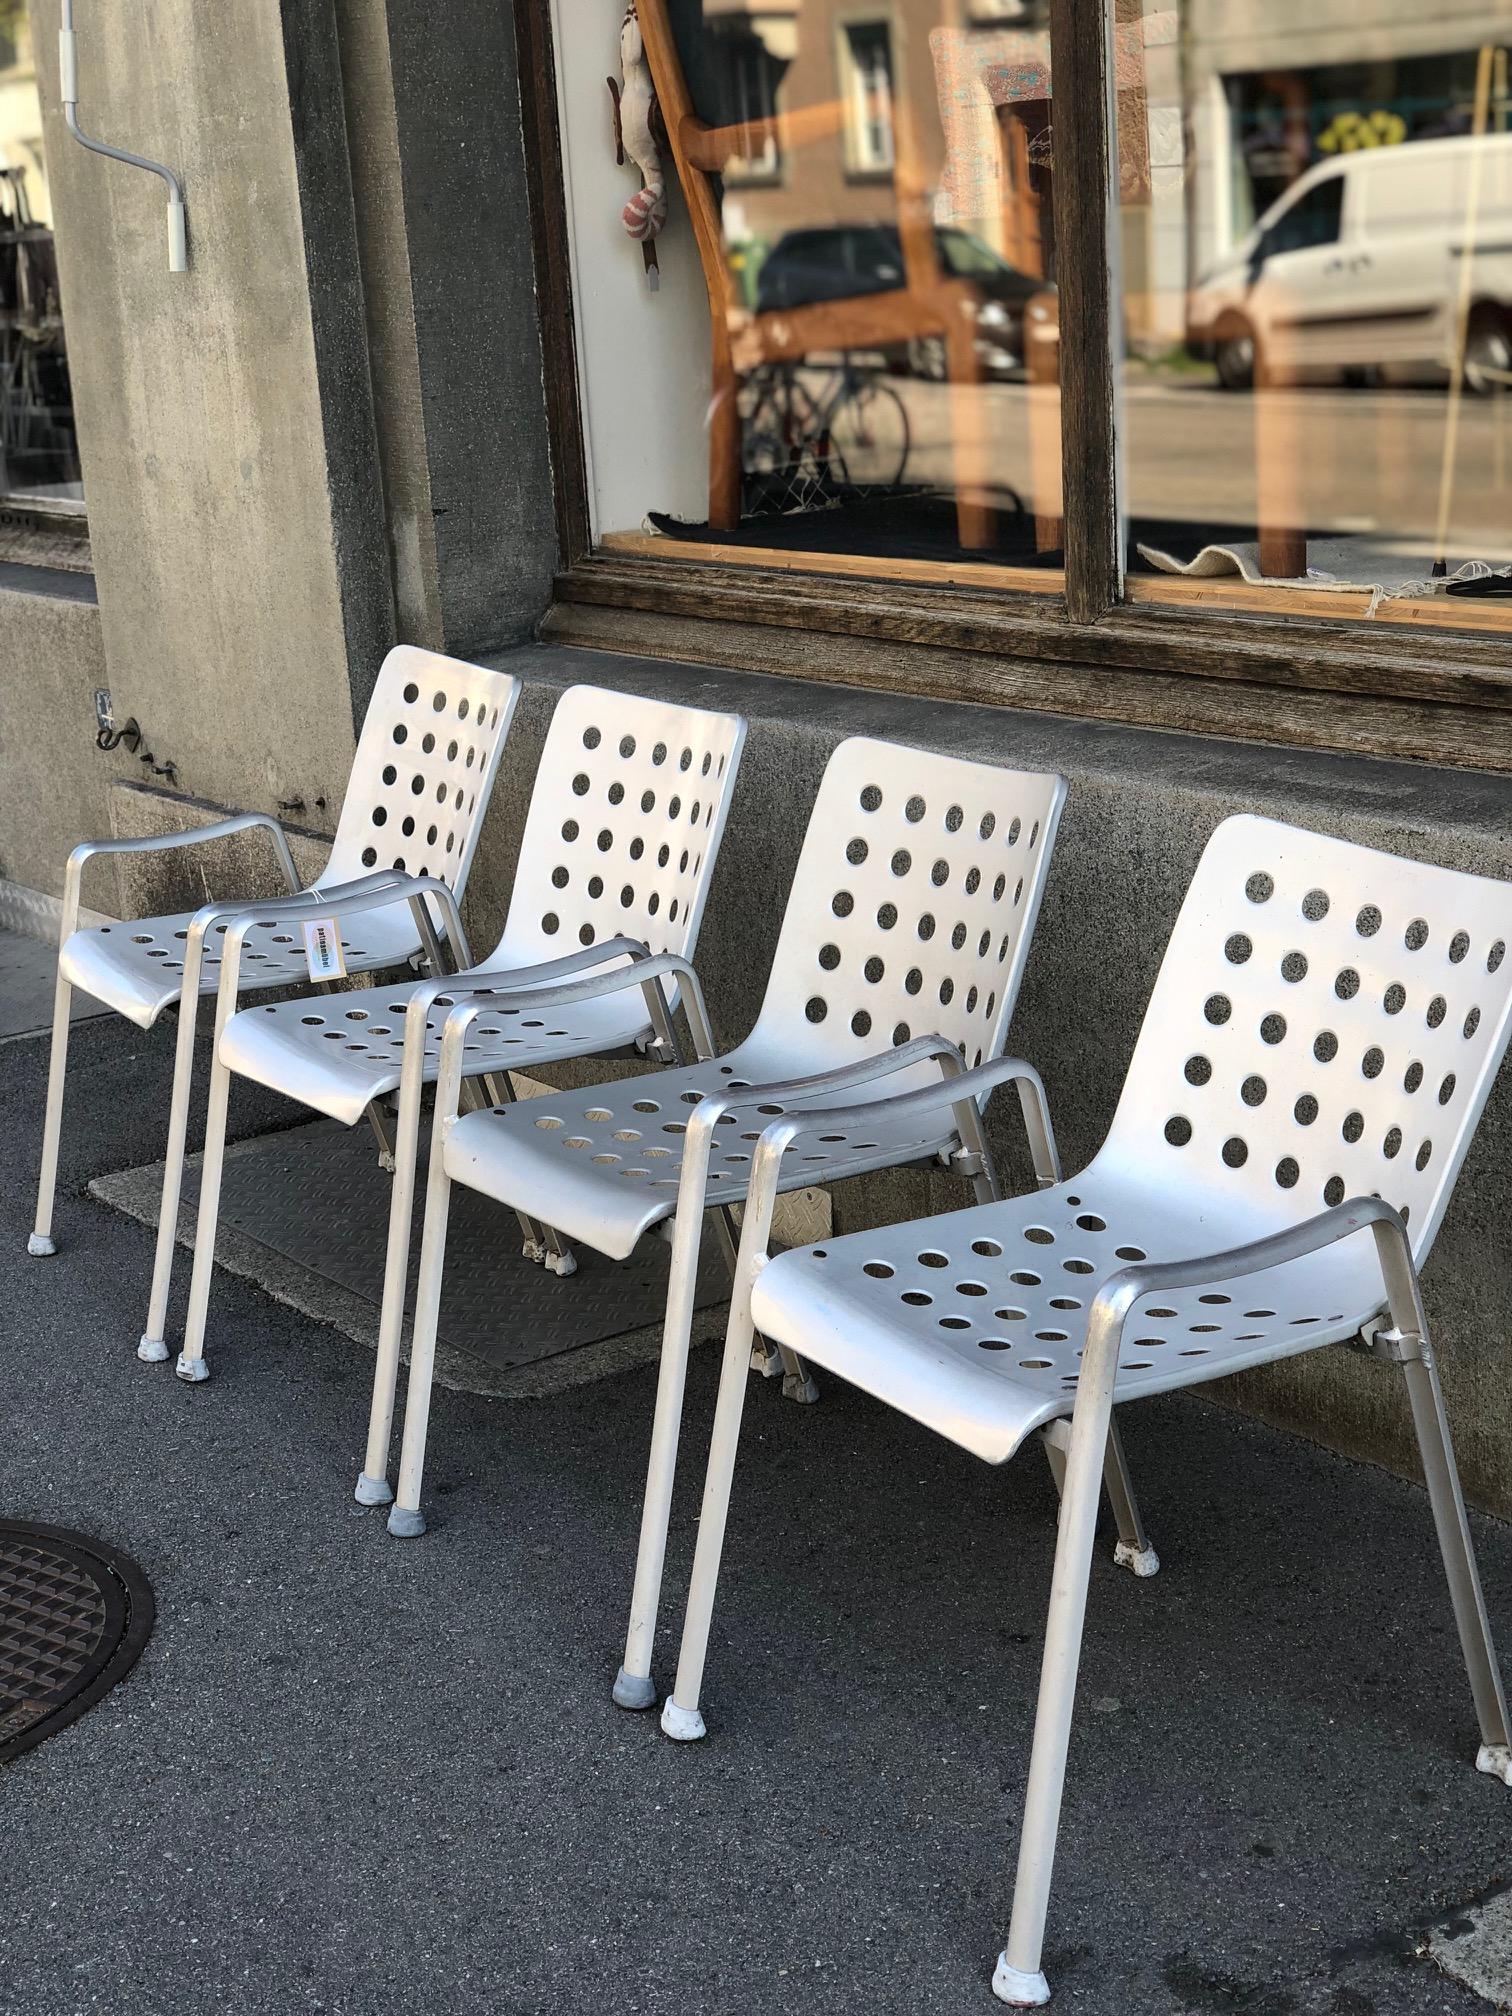 Set of 4 vintage Hans Coray aluminum “Landi” chairs. These examples have 60 holes in total which dates their manufacturing from 1962-1970 and was produced by MEWA, Switzerland. The Landi Chair was developed for the Swiss National Exhibition of 1939.